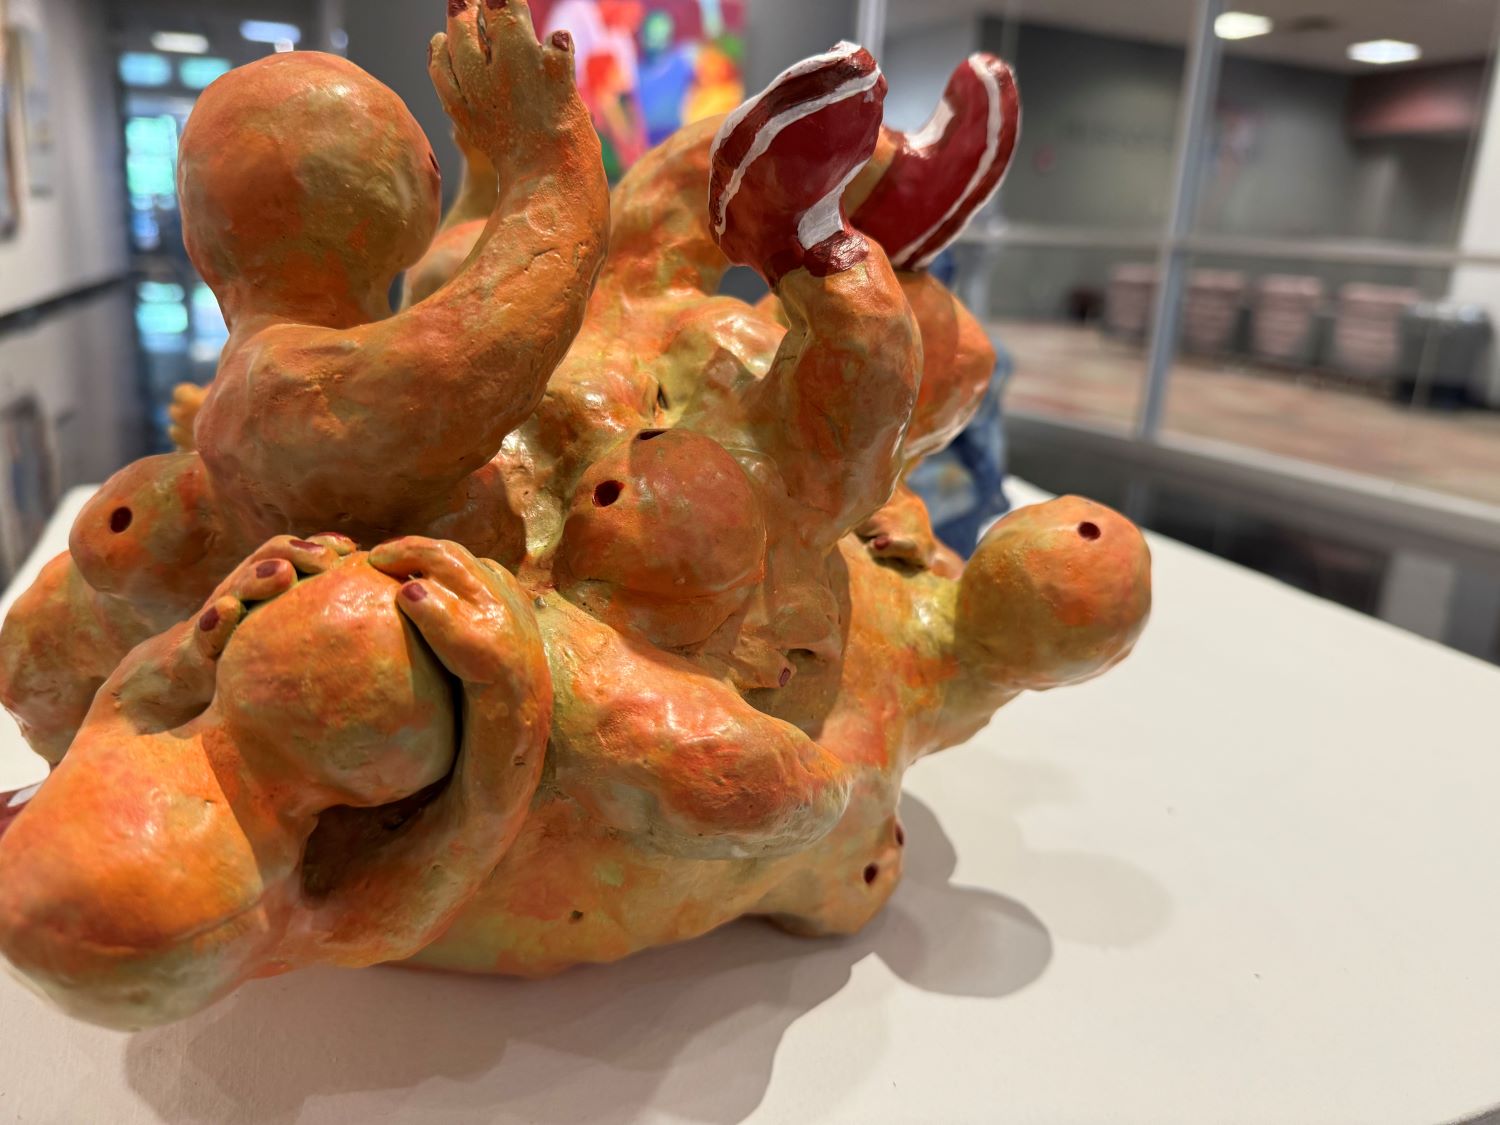 A colorful, abstract ceramic sculpture featuring a cluster of bulbous human figures, displayed on a white surface in a brightly lit room.